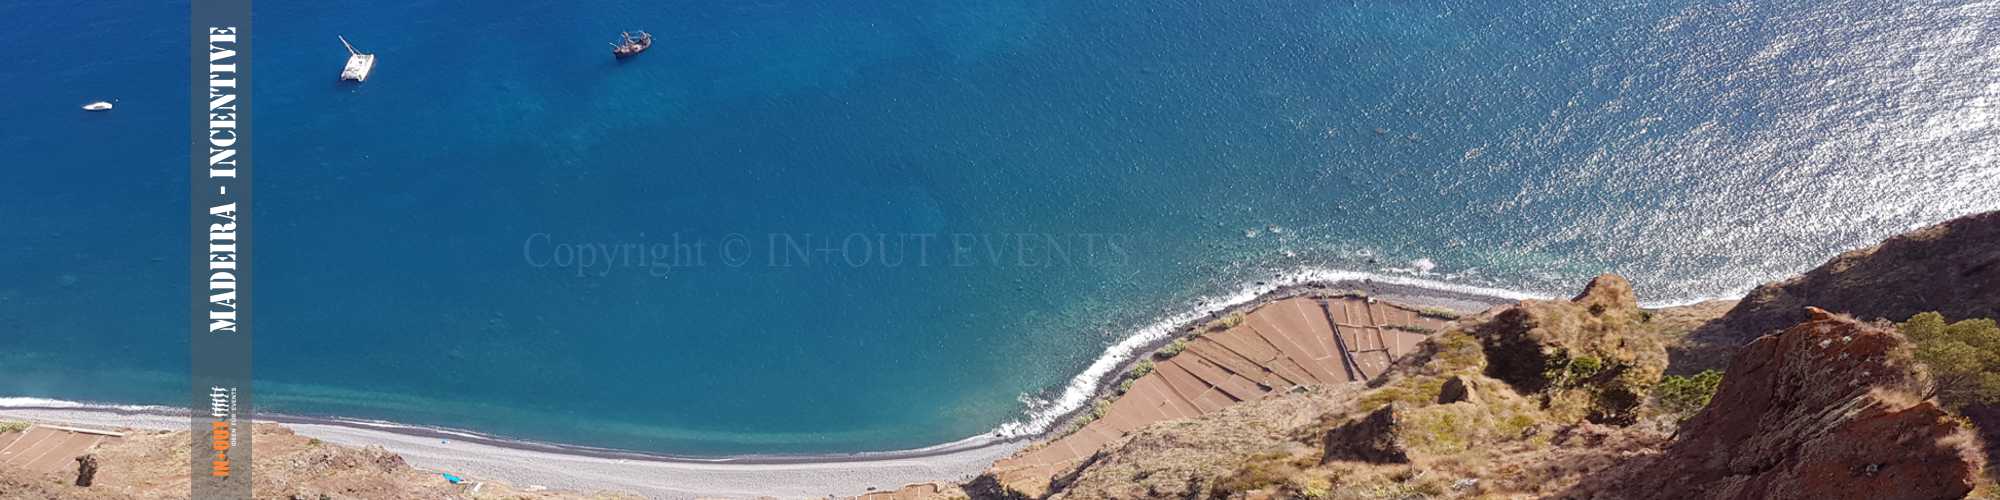 MADEIRA INCENTIVE EVENT • IN+OUT EVENTS